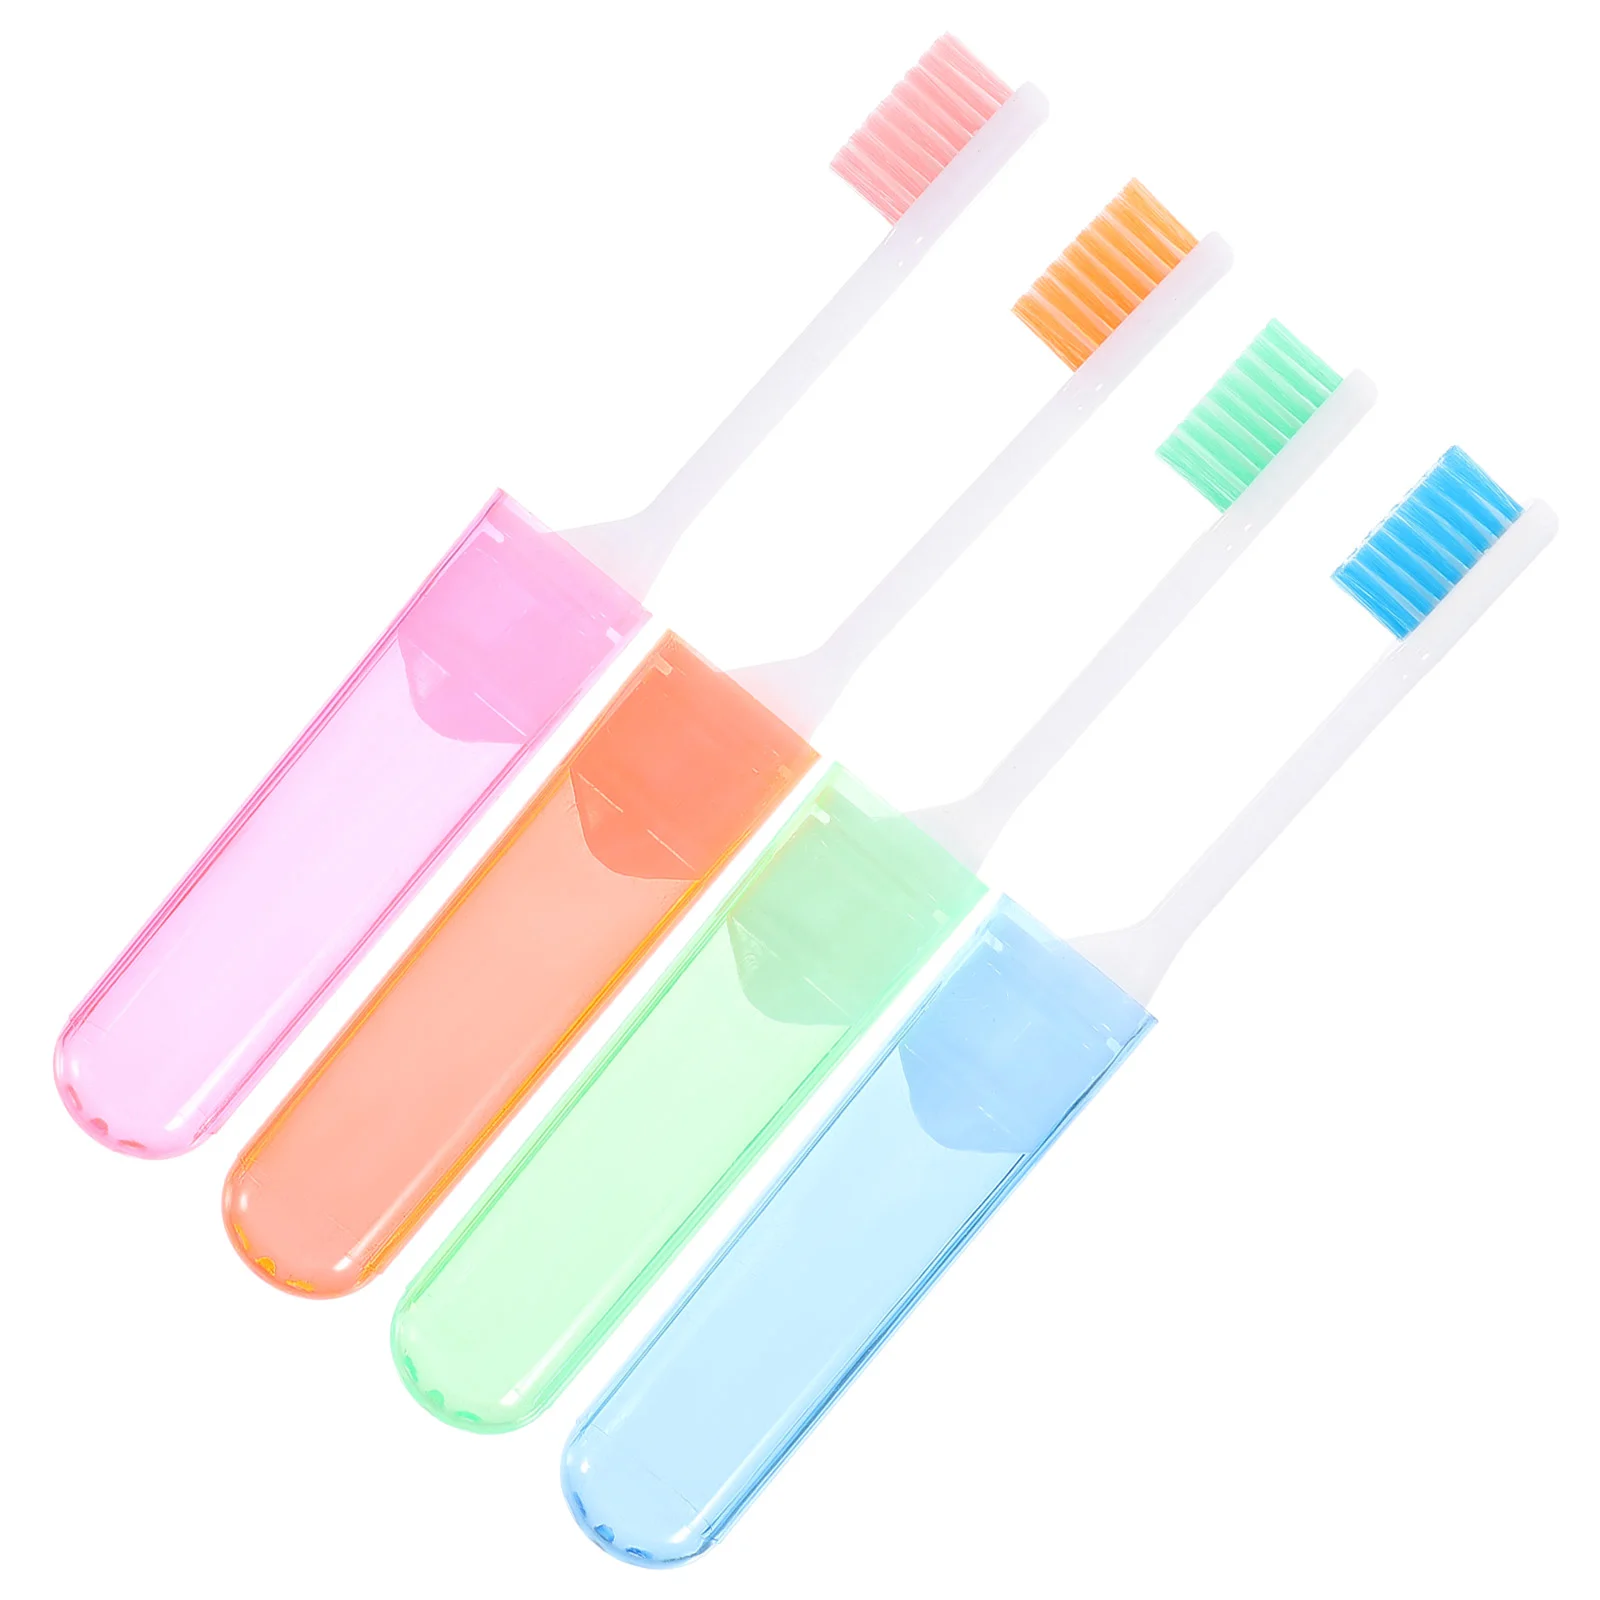 

4 Pcs Portable Travel Toothbrush Travel Essentials Small Clean Foldable Camping Pp Outdoor Traveling